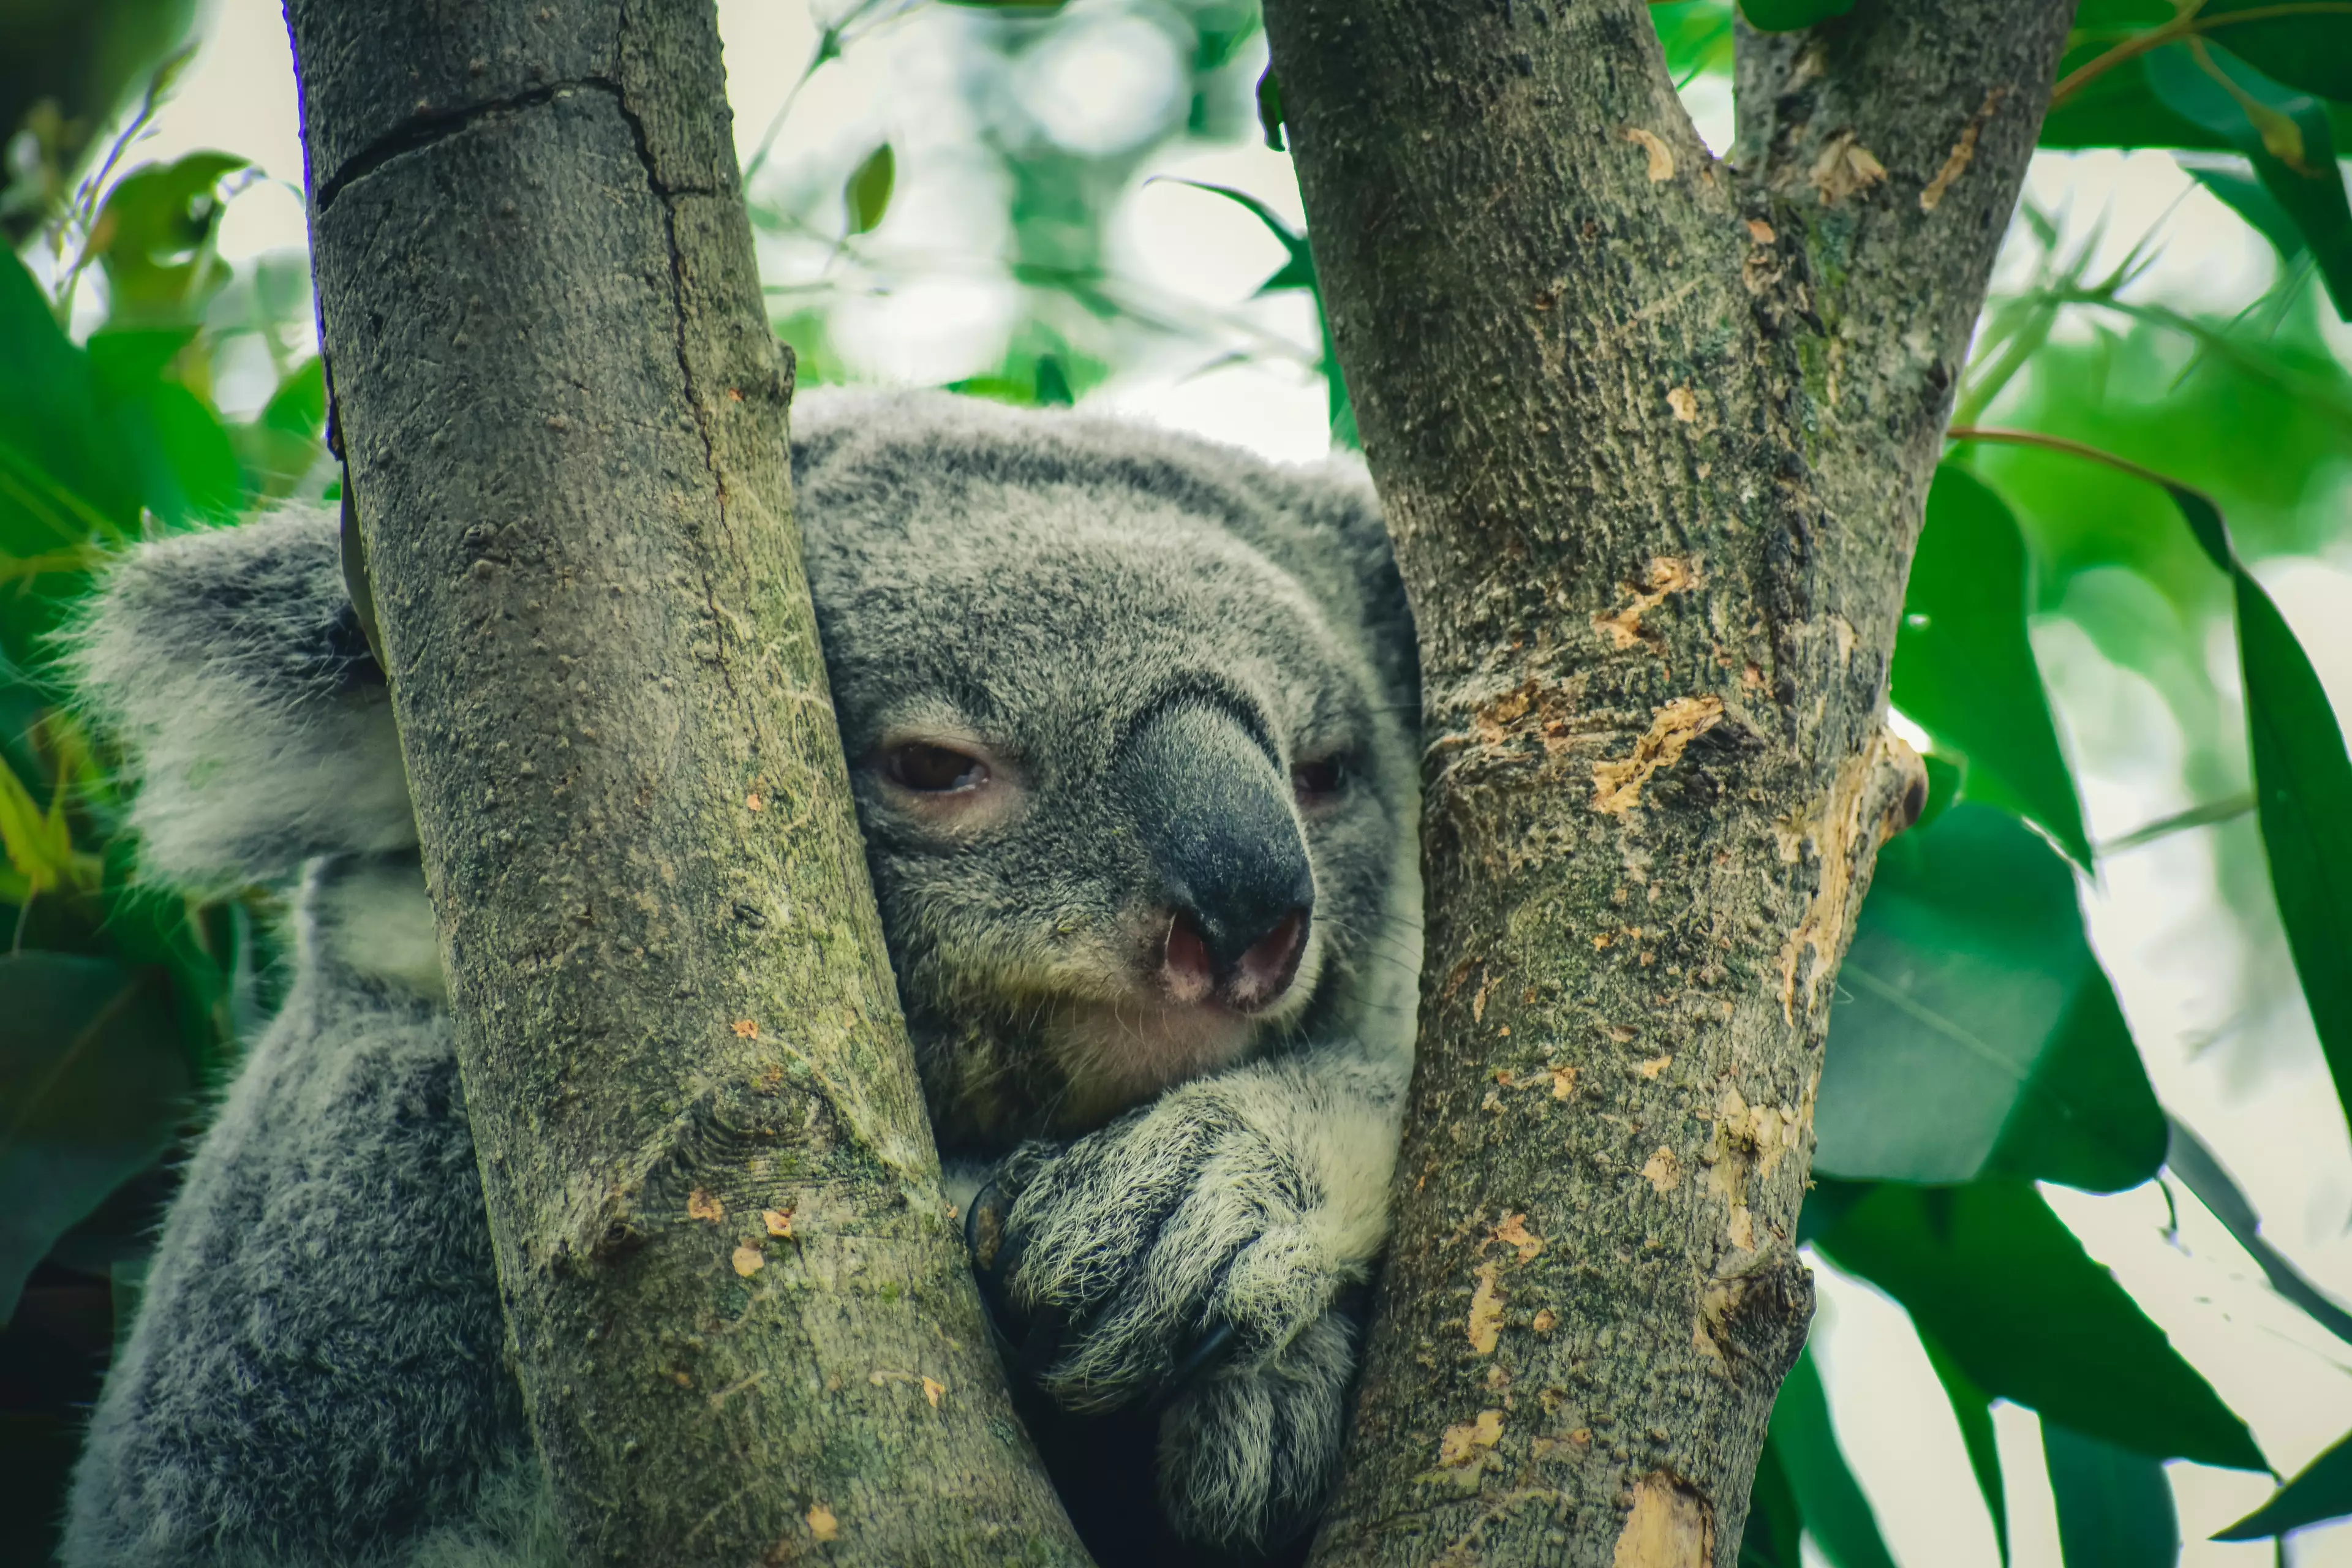 Koala's instincts during the fires are to rush to the top of the tree, which is actually the hottest place. (